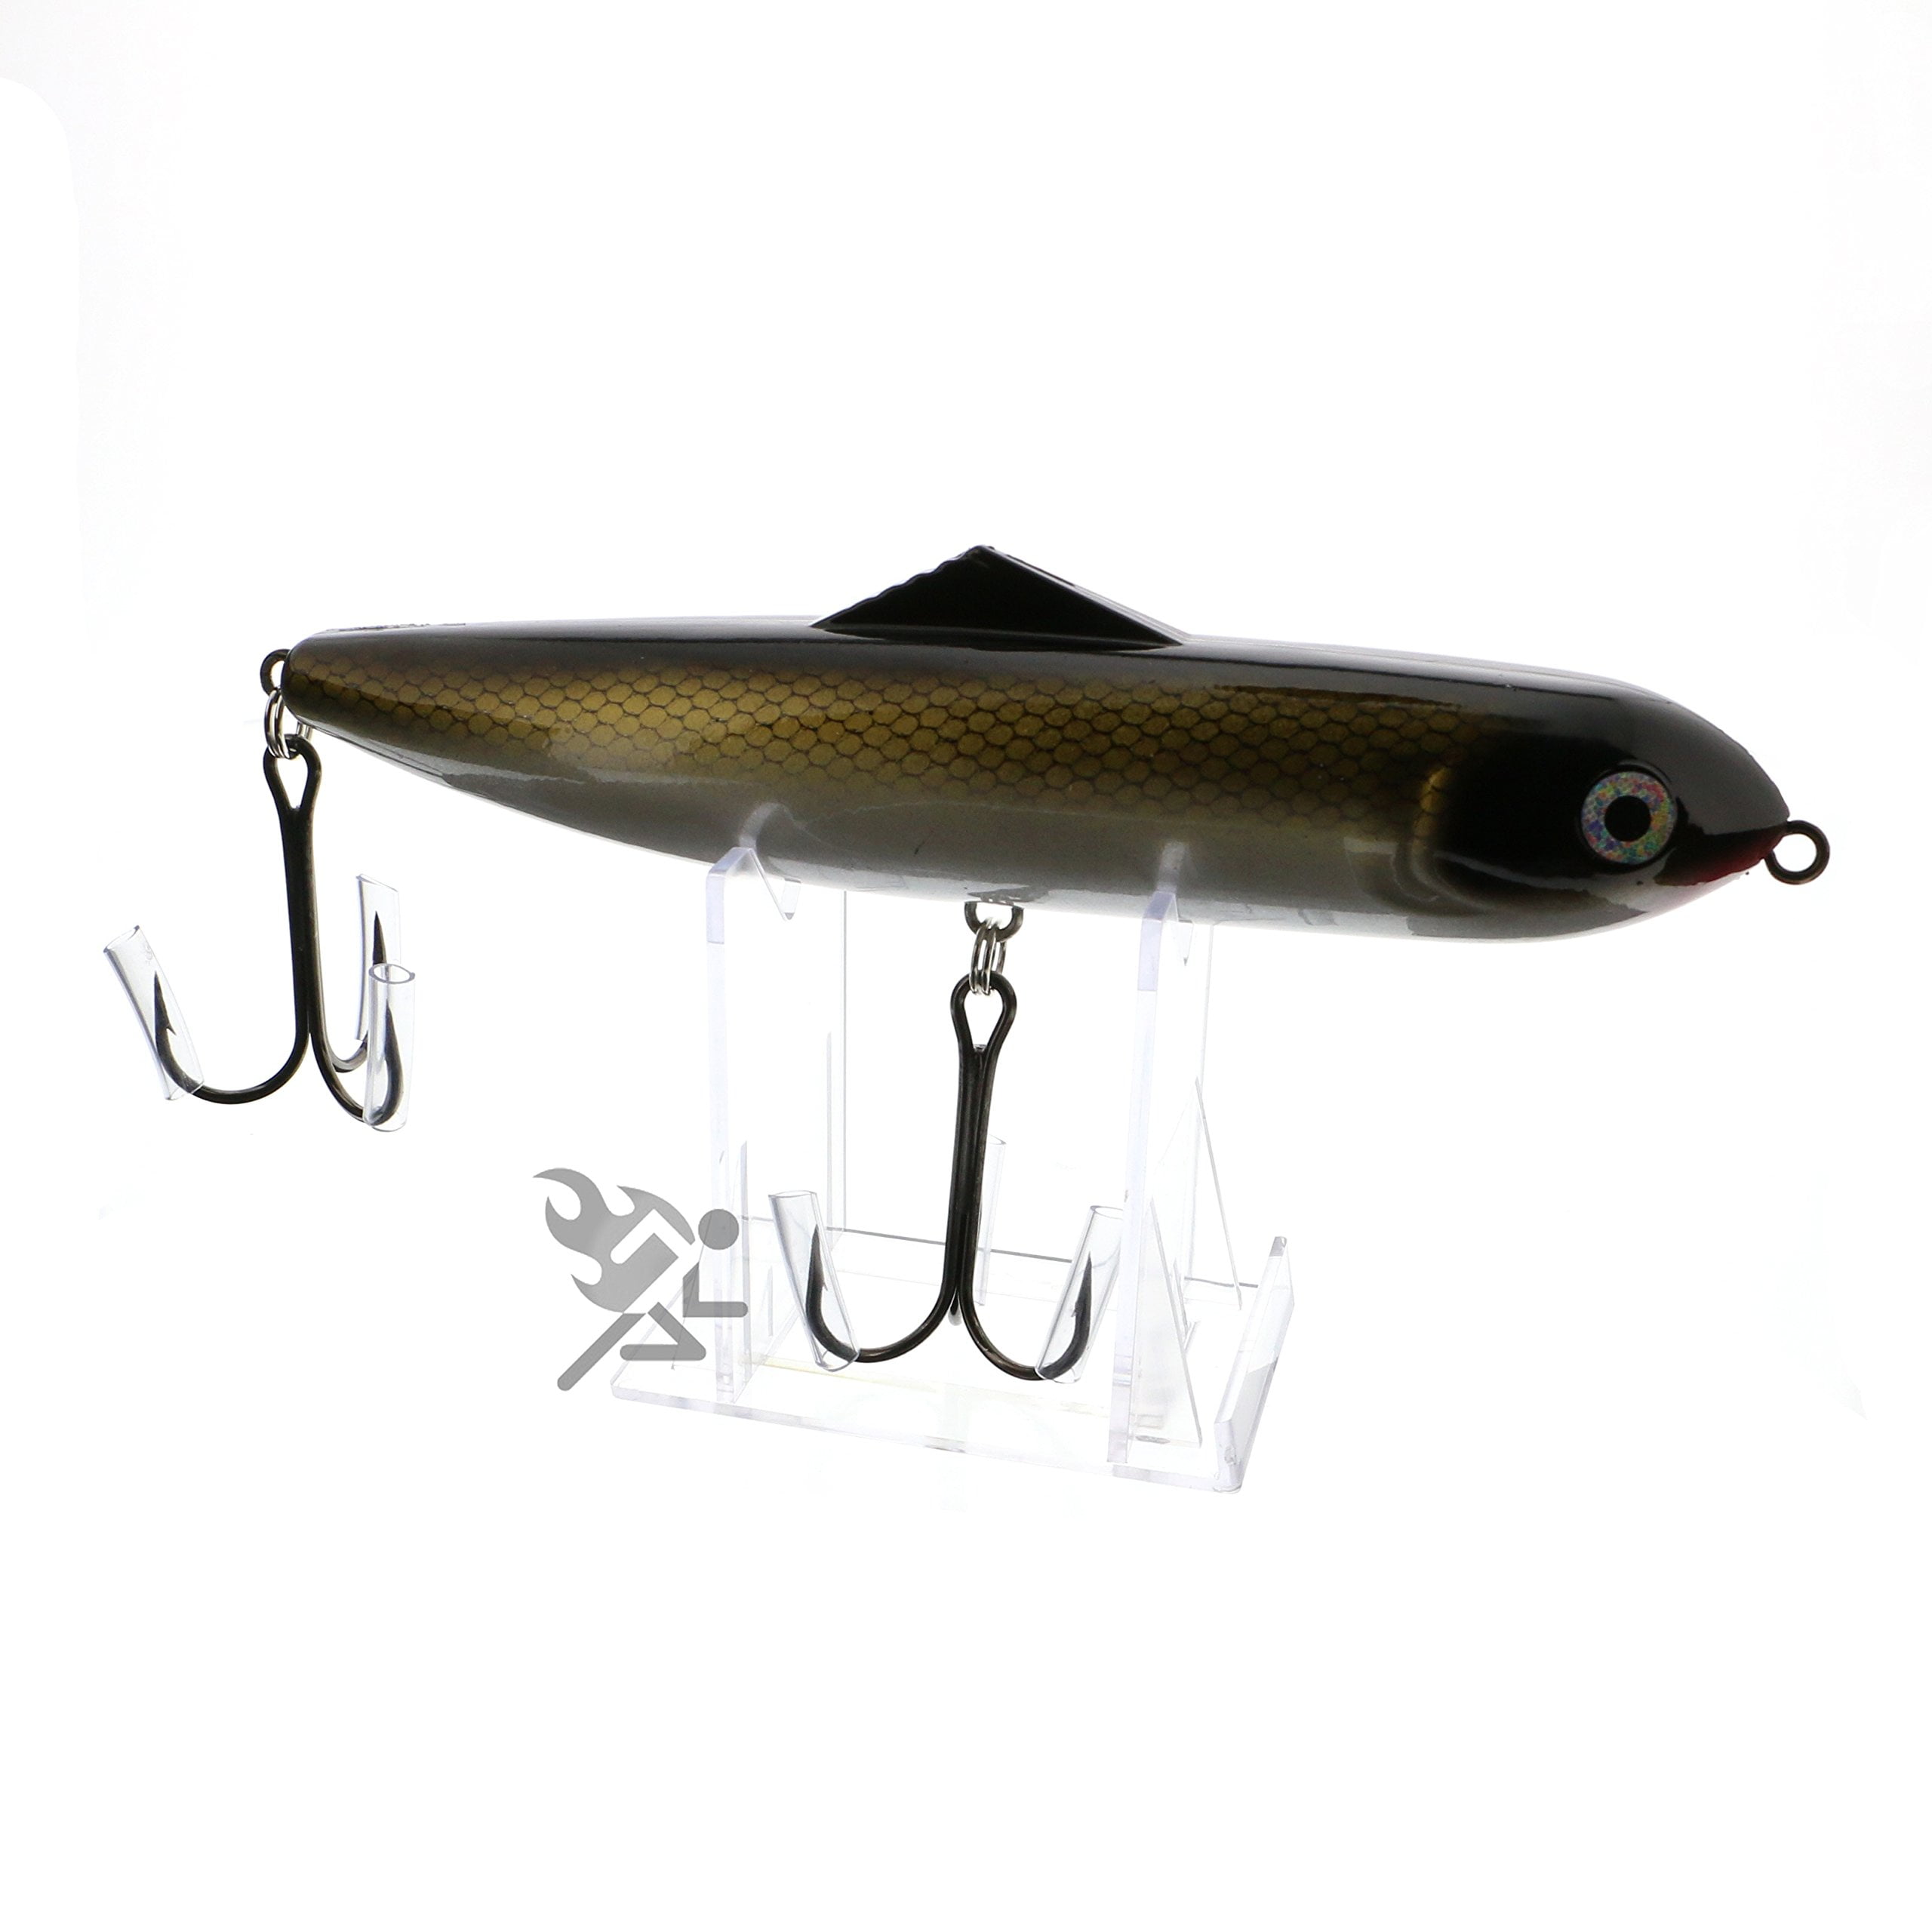 ~1 Adjustable 3 Part 2" Display Stand For South Bend Creek Chub Fishing lures